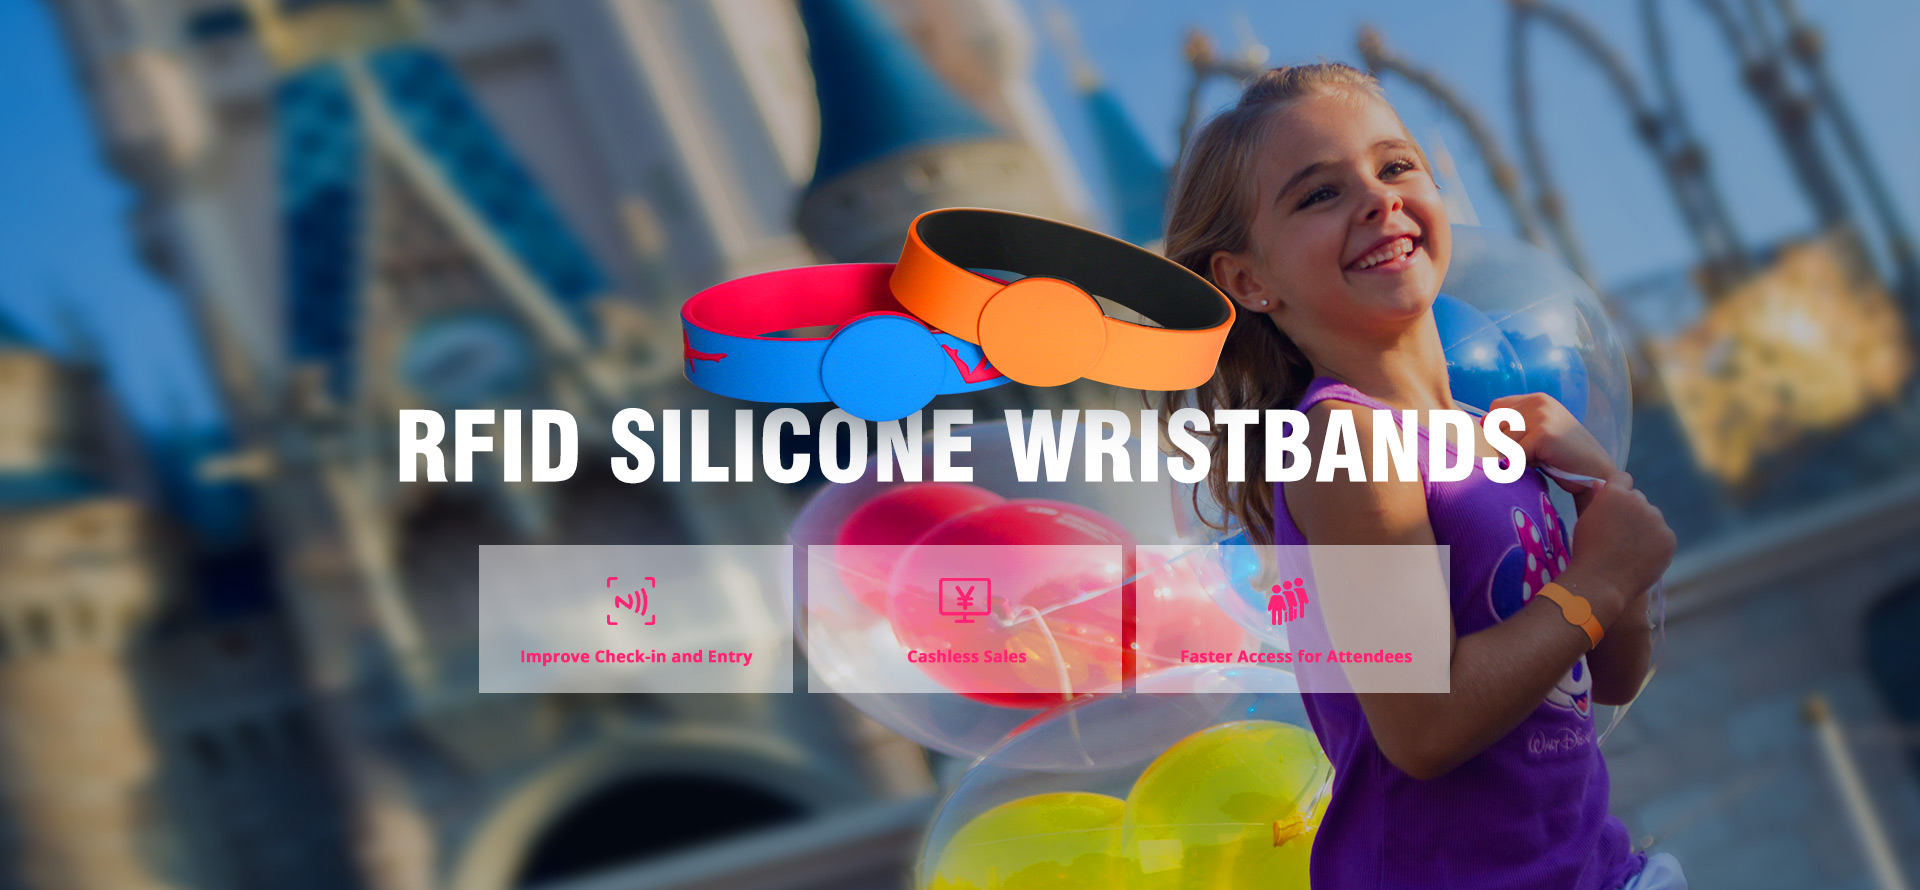 Buy RFID Silicone Wristband Products from rfidsilicone.com